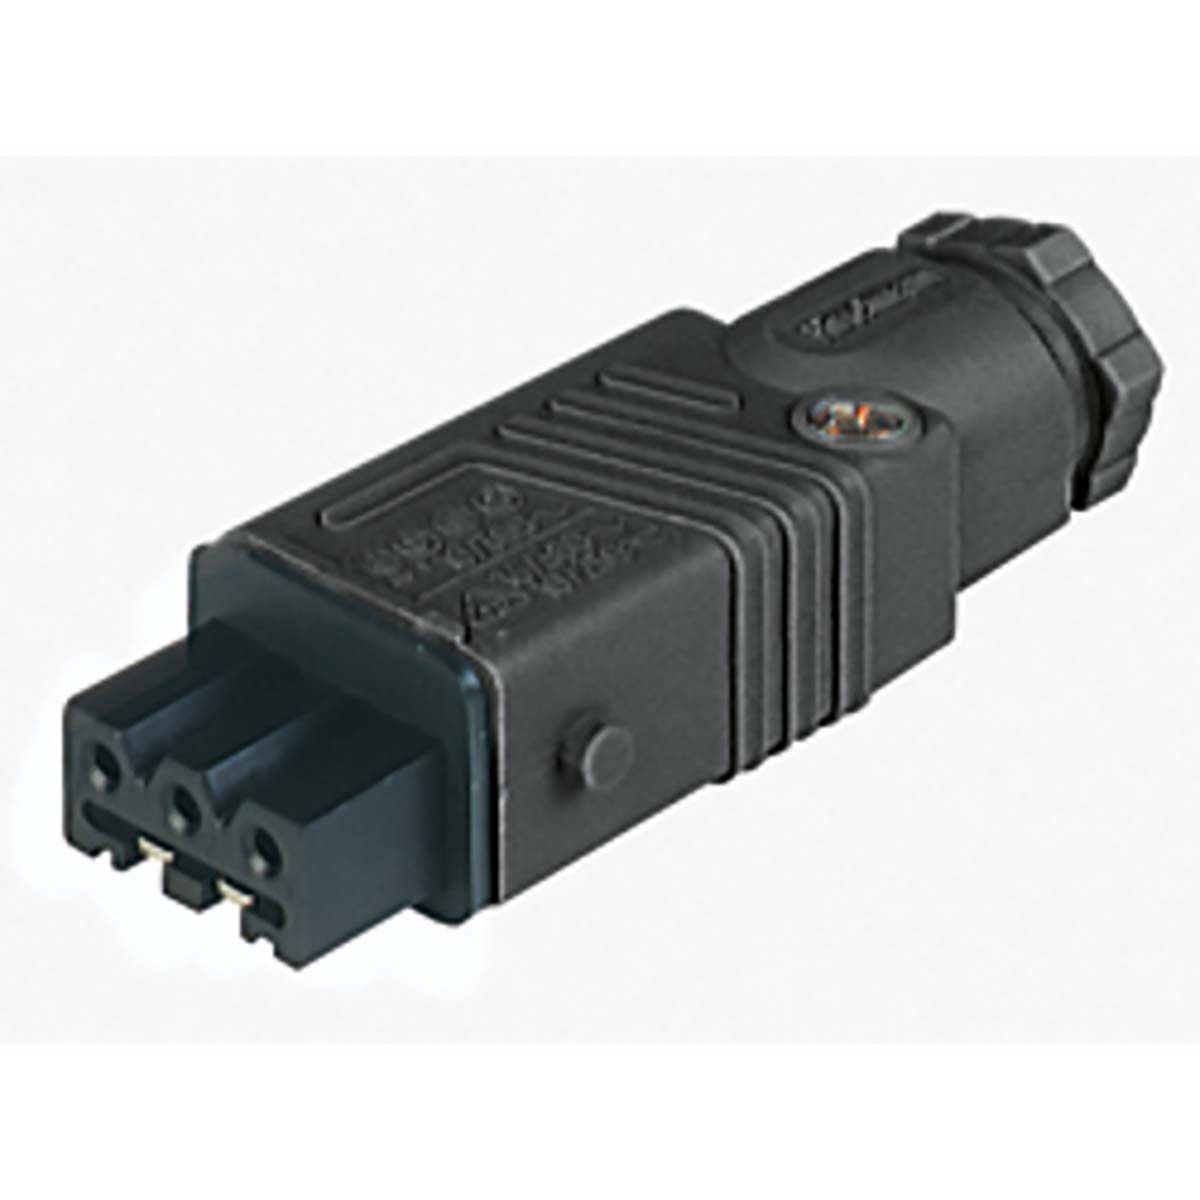 Lumberg Automation, ST IP54 Black Cable Mount 3P+E Industrial Power Socket, Rated At 10A, 230 V, 400 V